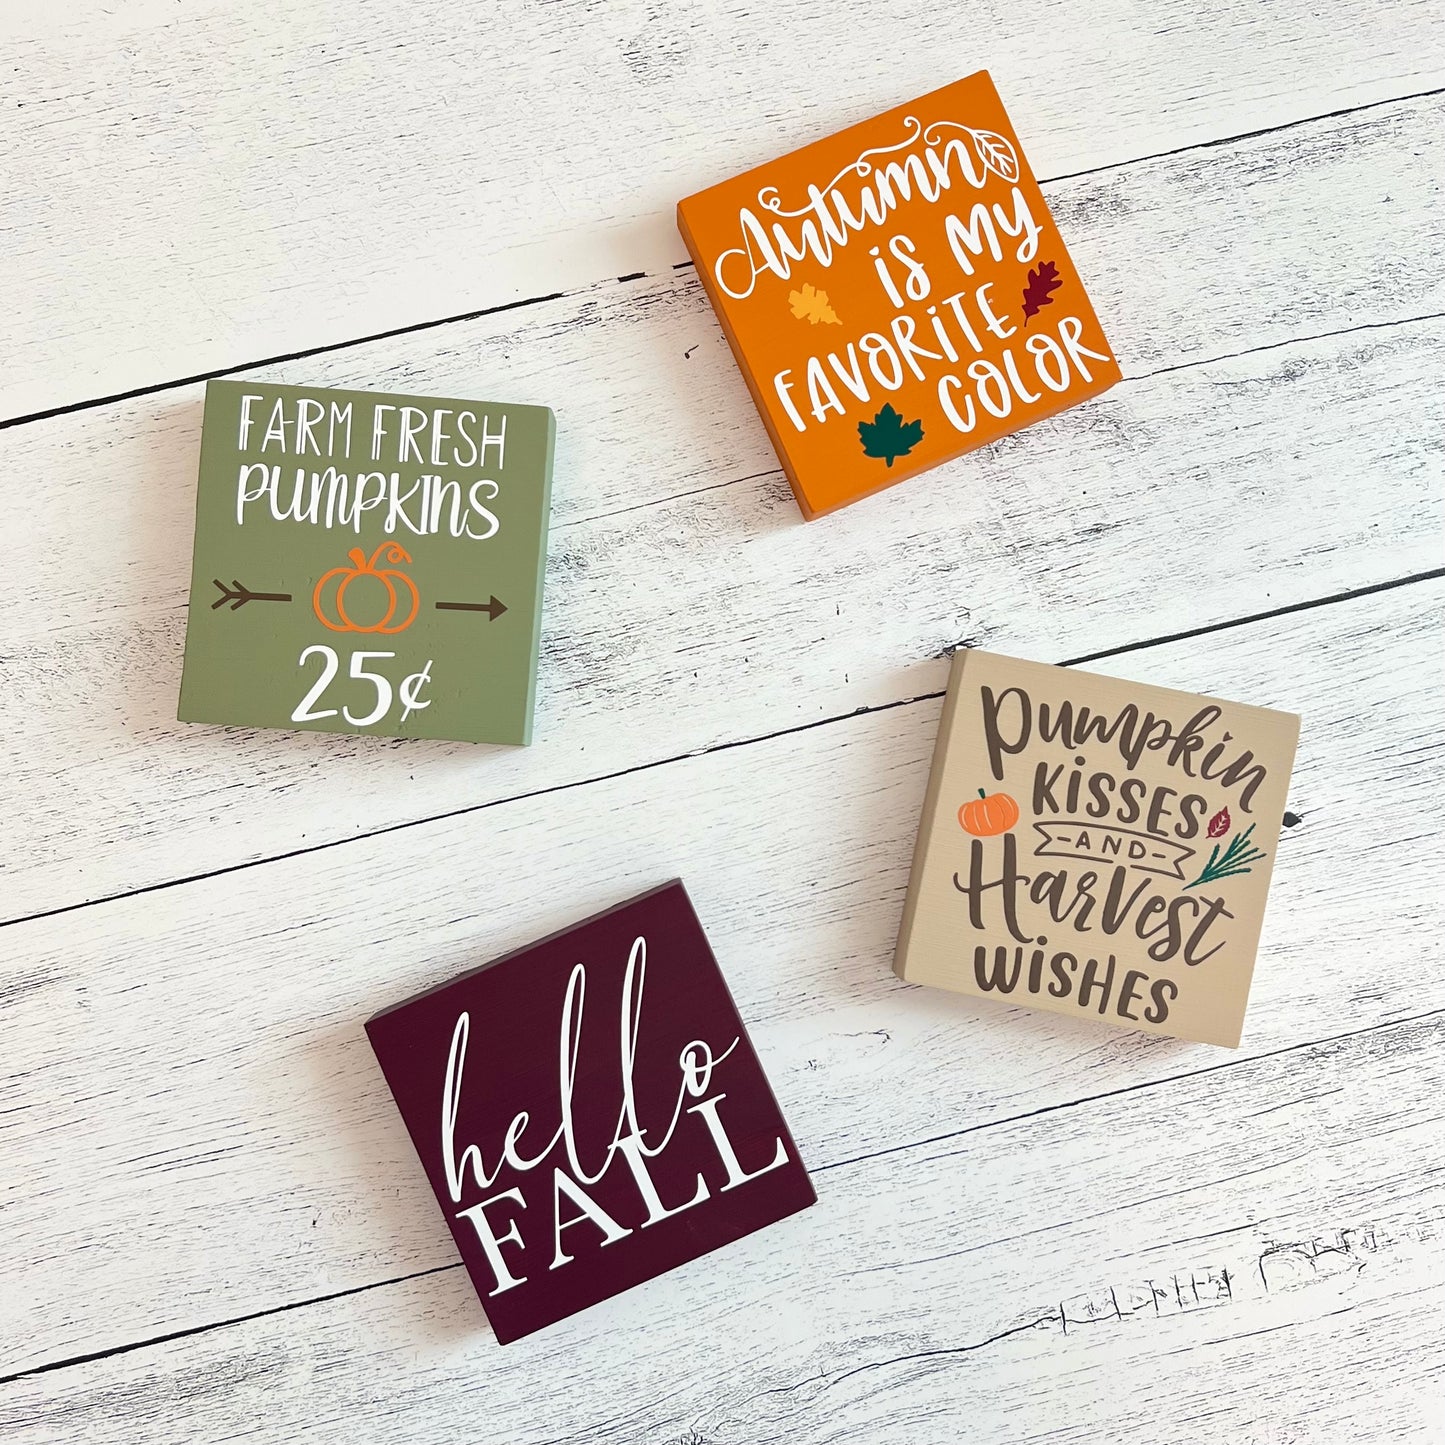 Fall/Autumn Themed Tiered Tray Decor Bundle